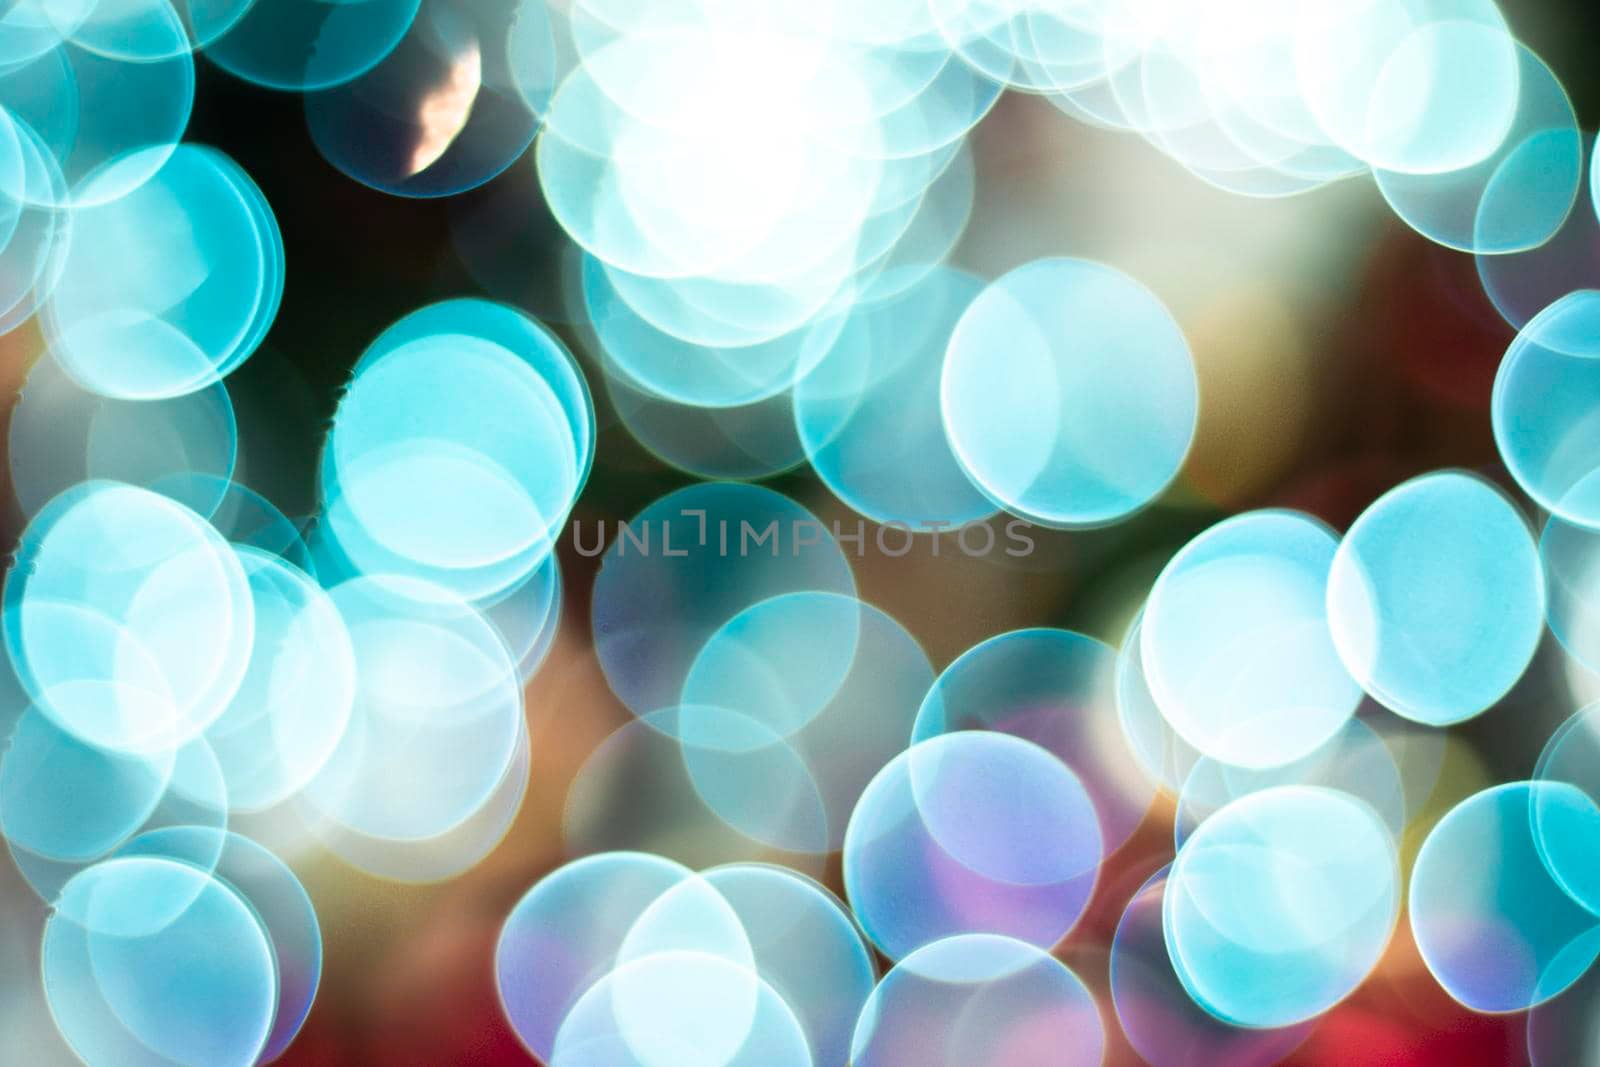 abstract blurry bokeh blue pastel tone colorful . lens flare light image.vintage tone color filter. Blue Tosca Bubble Background by Petrichor